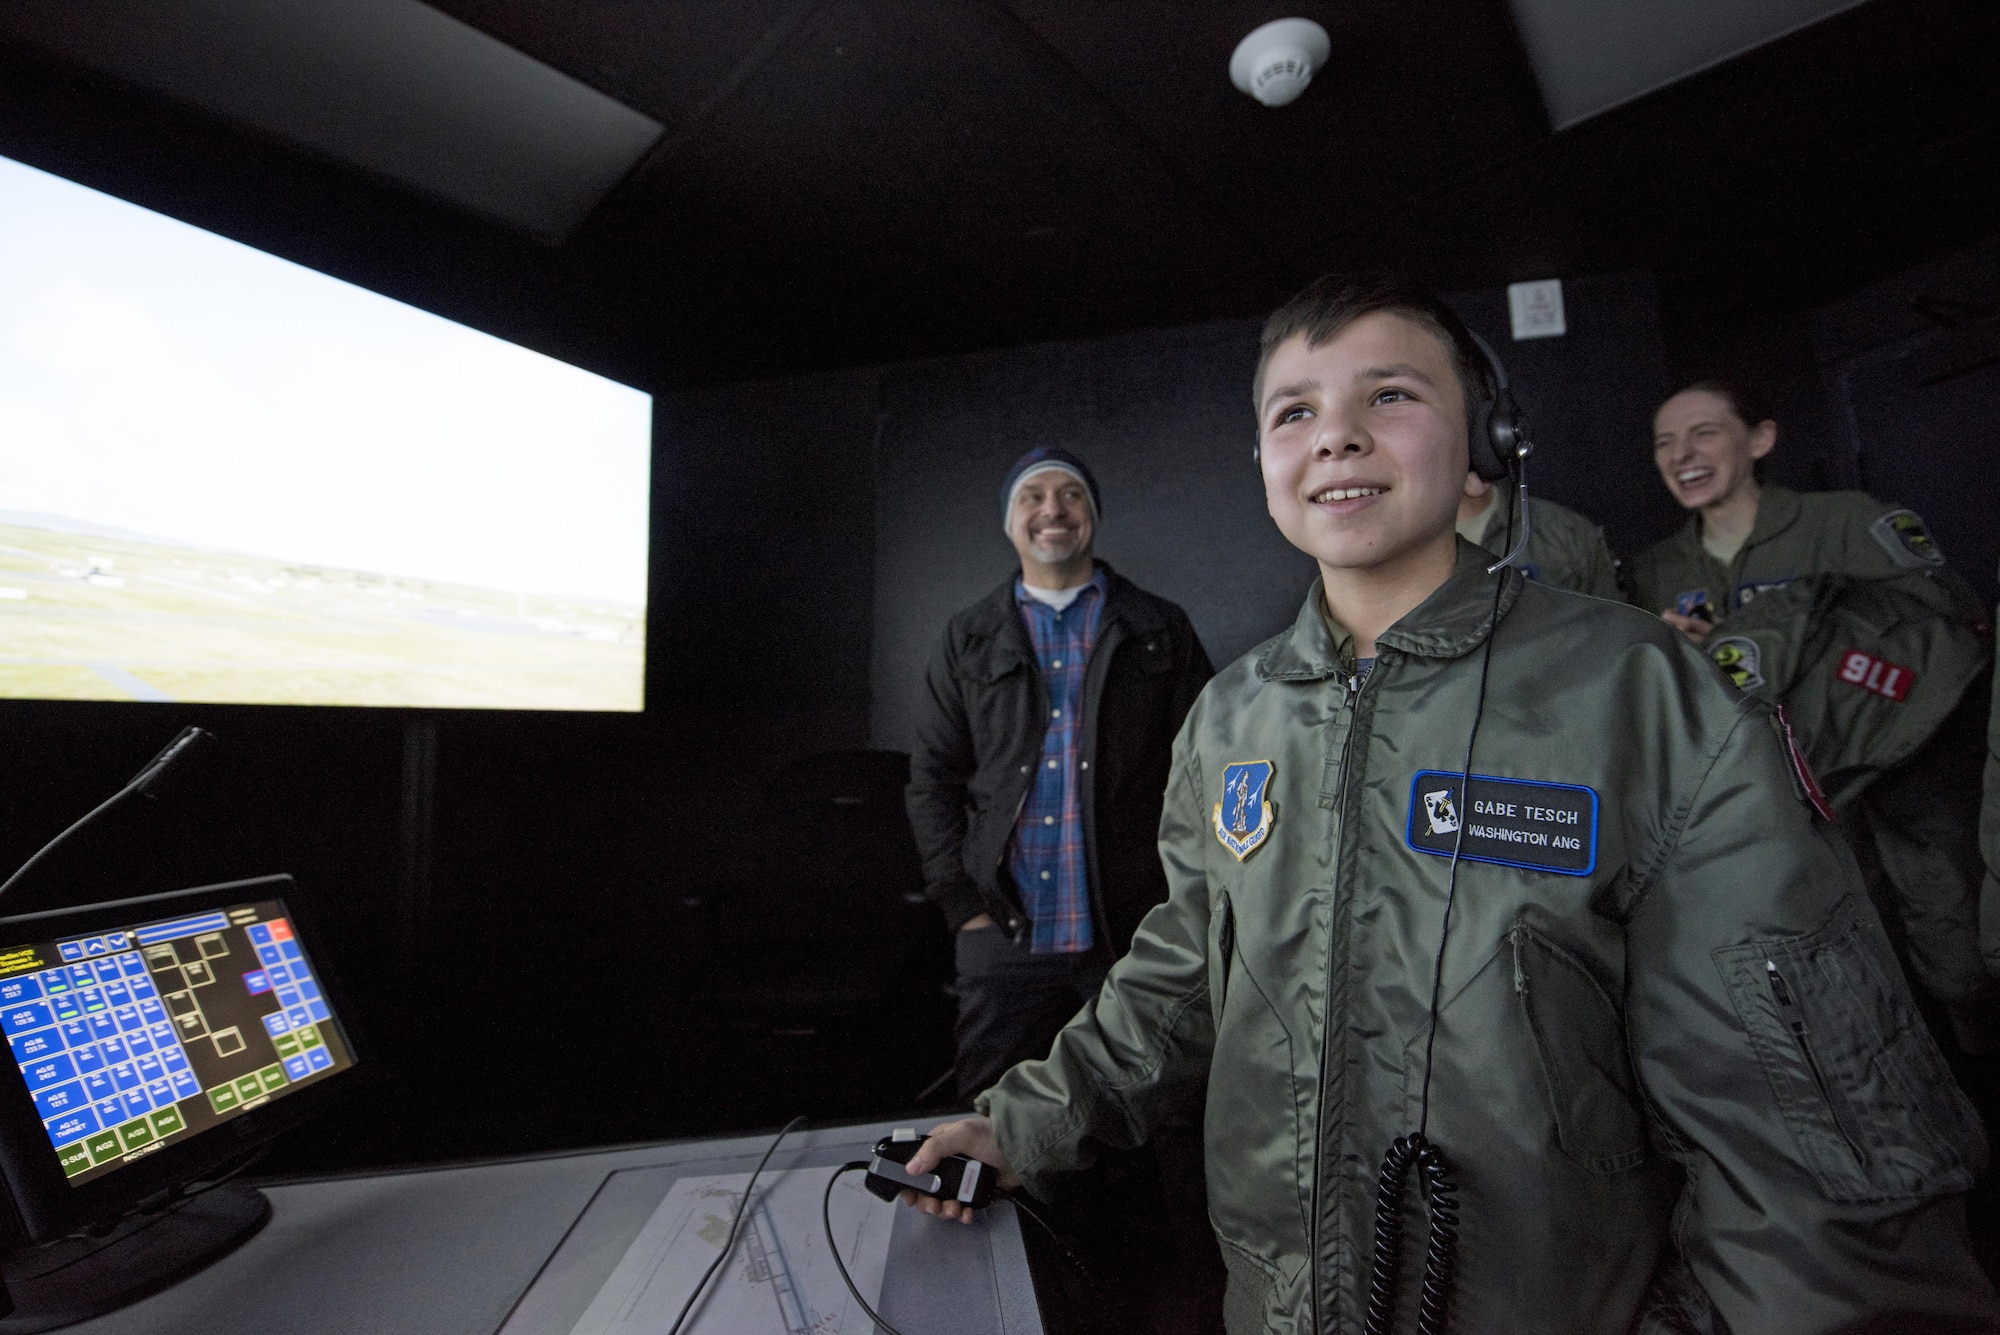 "Pilot for a Day" candidate Gabe Tesch issues landing instructions to a virtual pilot during his visit to the air traffic control simulator Mar. 1, 2017, at Fairchild Air Force Base, Washington. Gabe spent the day visiting several work centers throughout the base receiving hands on instruction and briefings on what it takes to be a KC-135 Stratotanker pilot. The "Pilot for a Day" program provides disadvantaged or seriously ill children a chance to spend the day with members of the Washington Air National Guard training as an honorary pilot. (U.S. Air Force photo by Master Sgt. Michael Stewart/Released) 

